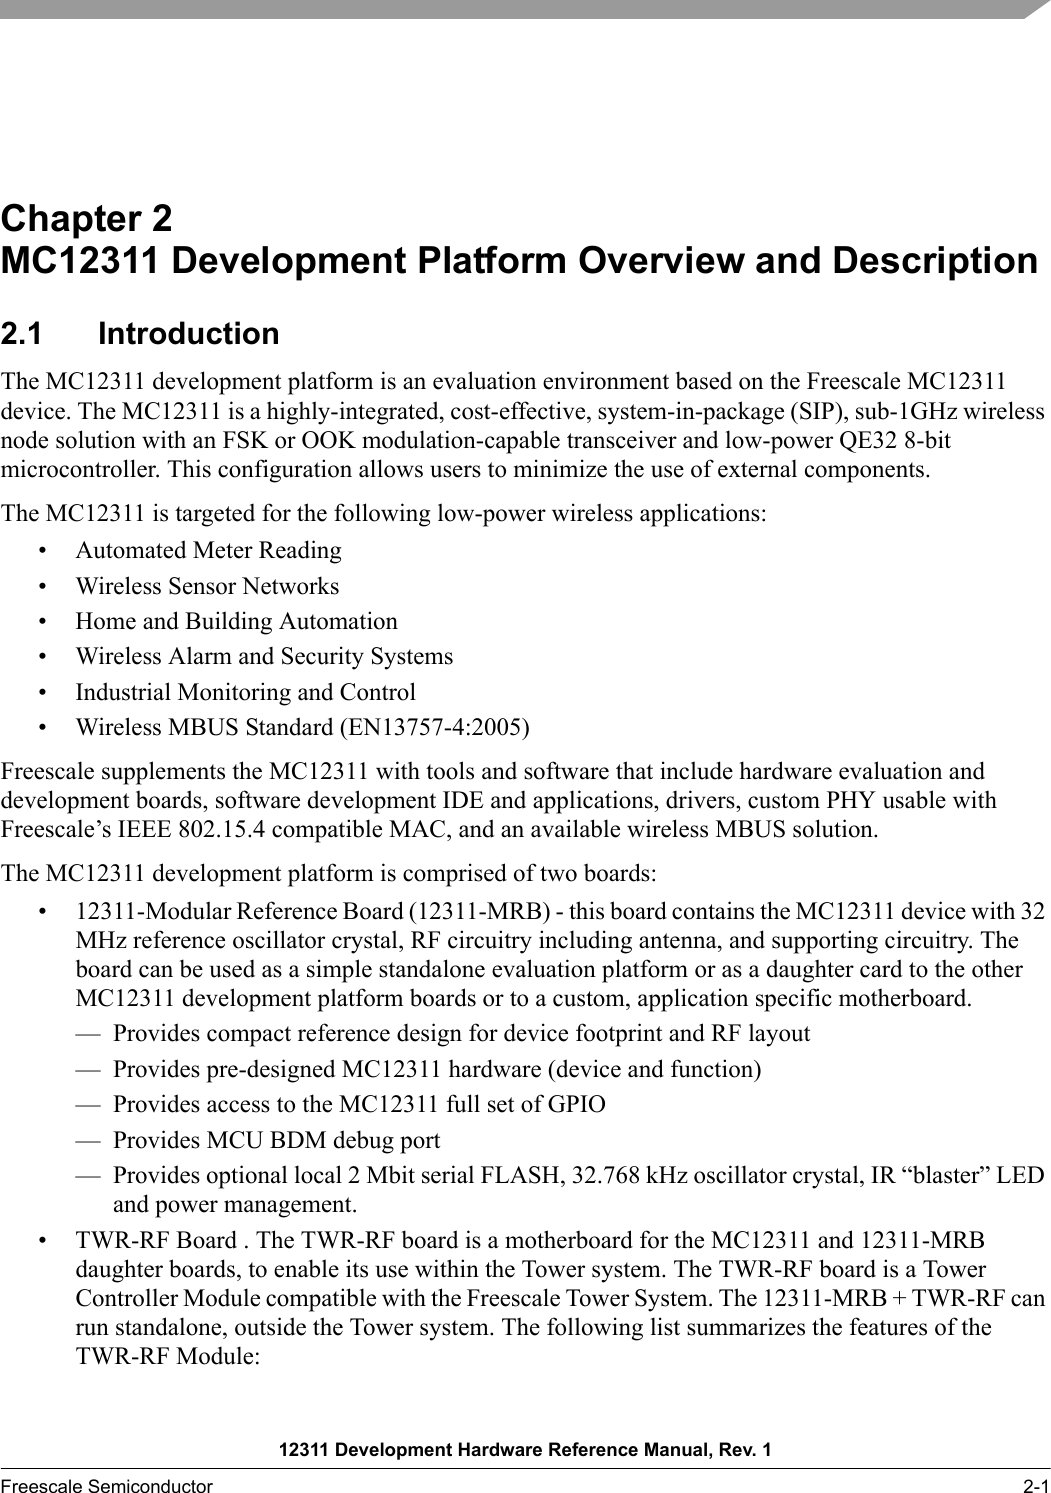 12311 Development Hardware Reference Manual, Rev. 1Freescale Semiconductor 2-1Chapter 2  MC12311 Development Platform Overview and Description2.1 IntroductionThe MC12311 development platform is an evaluation environment based on the Freescale MC12311 device. The MC12311 is a highly-integrated, cost-effective, system-in-package (SIP), sub-1GHz wireless node solution with an FSK or OOK modulation-capable transceiver and low-power QE32 8-bit microcontroller. This configuration allows users to minimize the use of external components.The MC12311 is targeted for the following low-power wireless applications:• Automated Meter Reading• Wireless Sensor Networks• Home and Building Automation• Wireless Alarm and Security Systems• Industrial Monitoring and Control• Wireless MBUS Standard (EN13757-4:2005)Freescale supplements the MC12311 with tools and software that include hardware evaluation and development boards, software development IDE and applications, drivers, custom PHY usable with Freescale’s IEEE 802.15.4 compatible MAC, and an available wireless MBUS solution.The MC12311 development platform is comprised of two boards:• 12311-Modular Reference Board (12311-MRB) - this board contains the MC12311 device with 32 MHz reference oscillator crystal, RF circuitry including antenna, and supporting circuitry. The board can be used as a simple standalone evaluation platform or as a daughter card to the other MC12311 development platform boards or to a custom, application specific motherboard. — Provides compact reference design for device footprint and RF layout— Provides pre-designed MC12311 hardware (device and function)— Provides access to the MC12311 full set of GPIO— Provides MCU BDM debug port— Provides optional local 2 Mbit serial FLASH, 32.768 kHz oscillator crystal, IR “blaster” LED and power management.• TWR-RF Board . The TWR-RF board is a motherboard for the MC12311 and 12311-MRB daughter boards, to enable its use within the Tower system. The TWR-RF board is a Tower Controller Module compatible with the Freescale Tower System. The 12311-MRB + TWR-RF can run standalone, outside the Tower system. The following list summarizes the features of the TWR-RF Module: